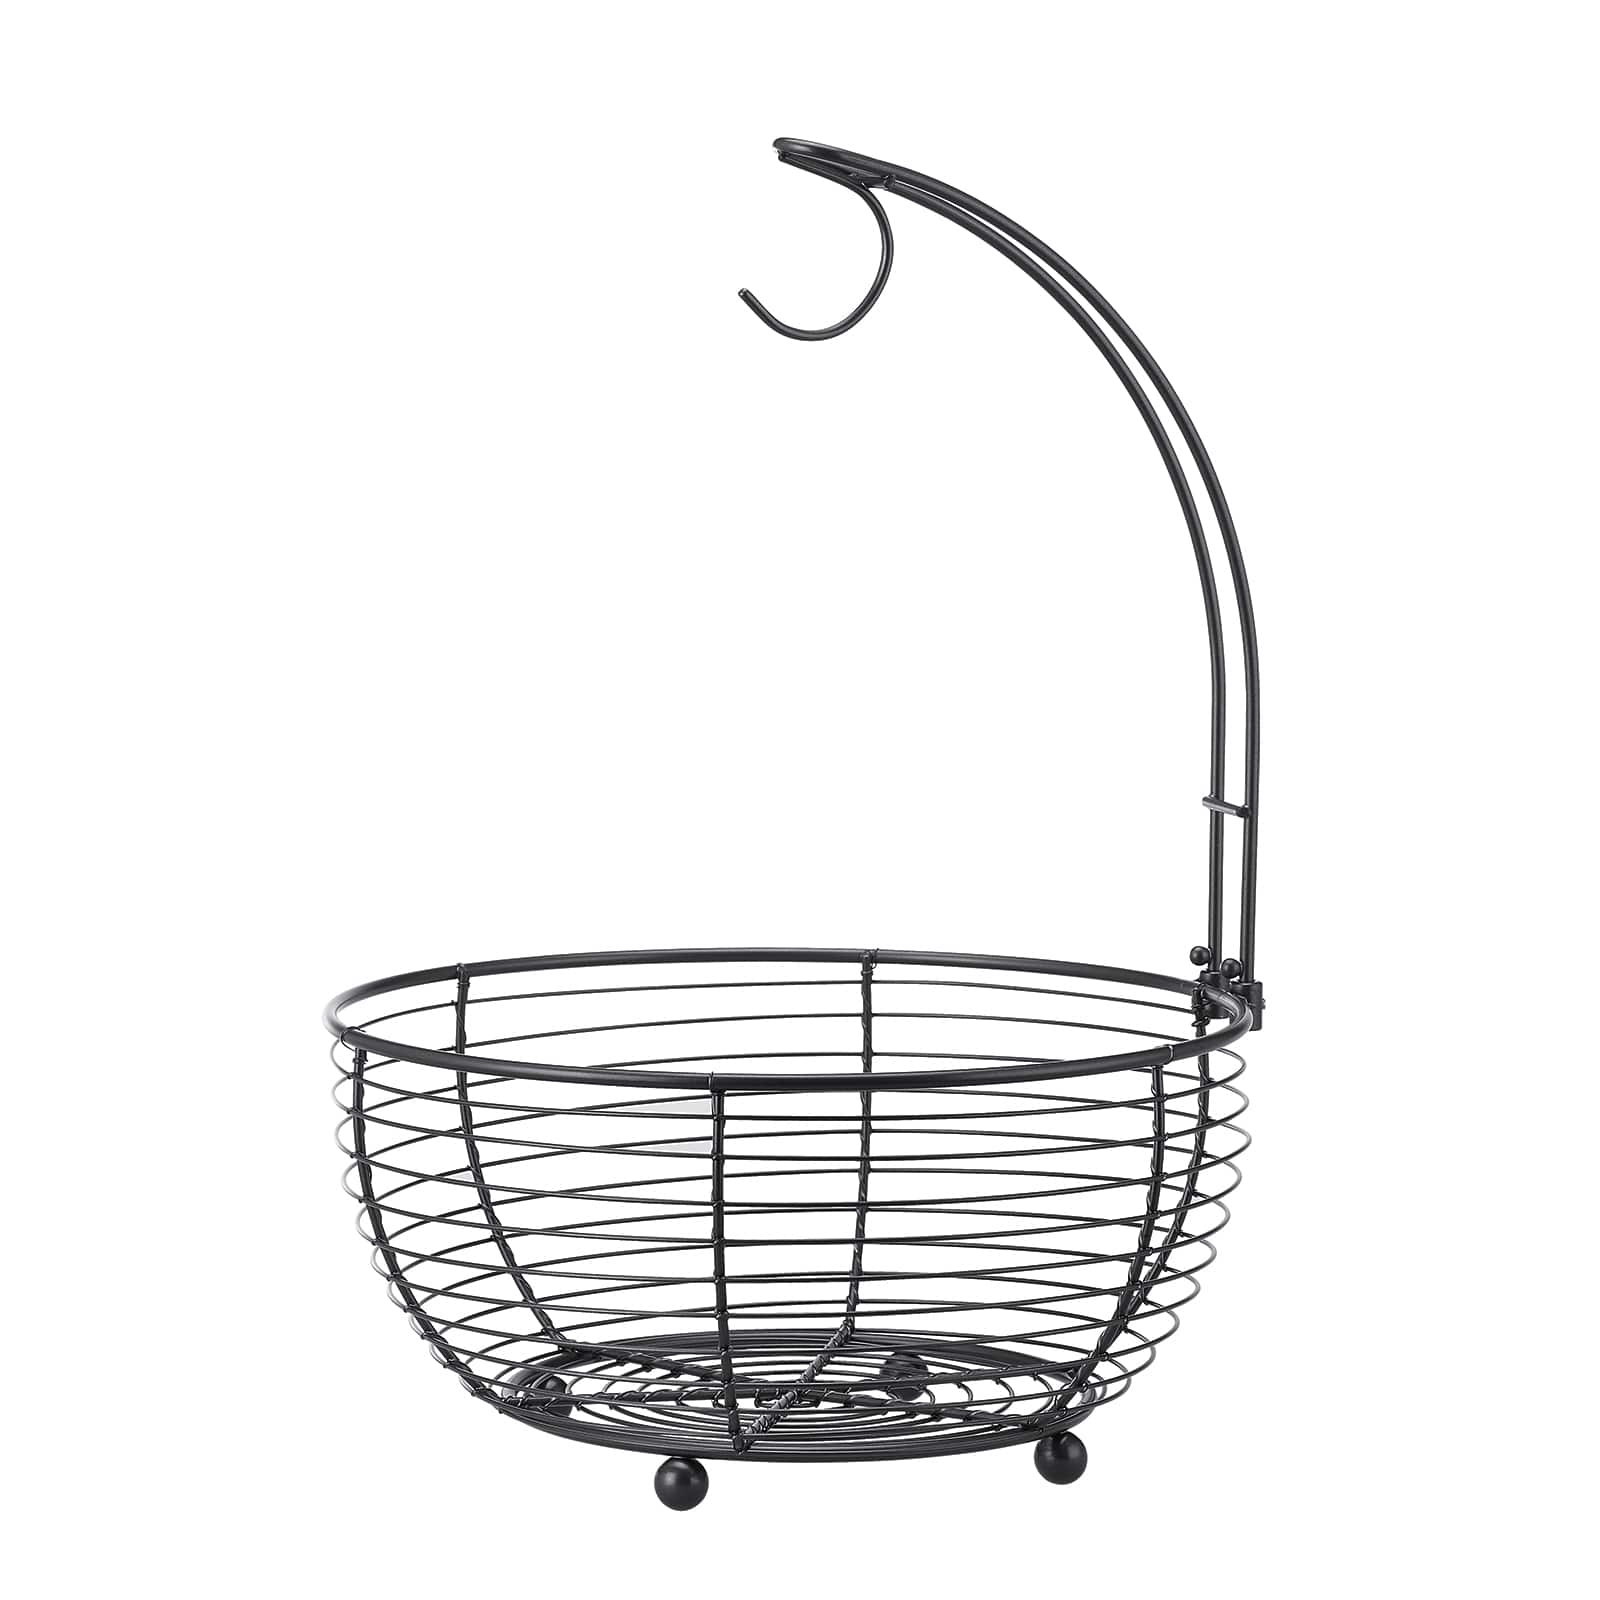 SunnyPoint Wire Fruit Tree Bowl with Banana Hanger